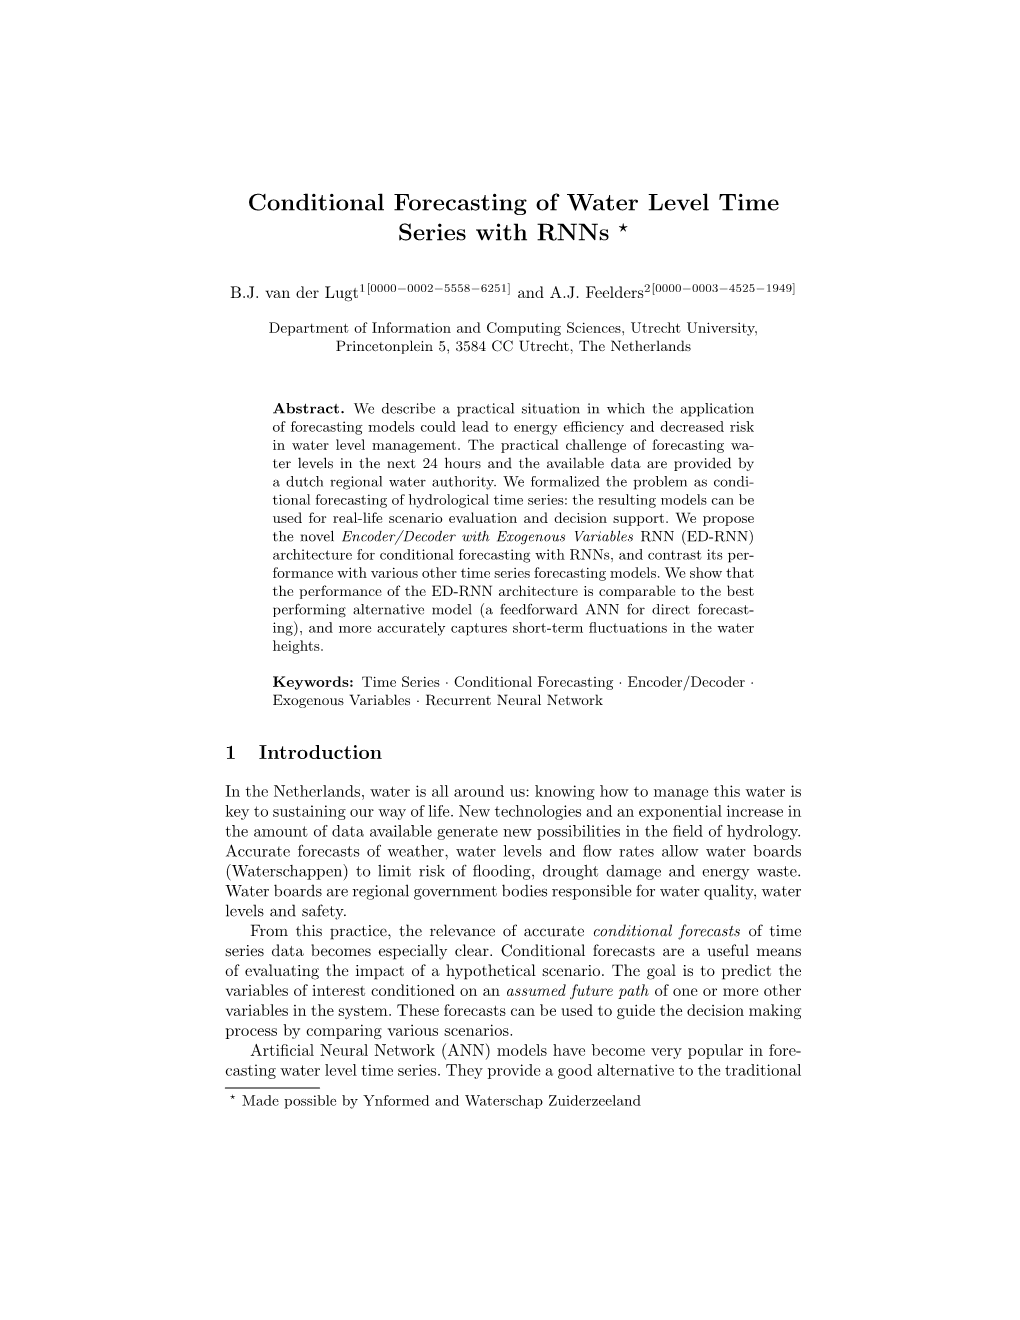 Conditional Forecasting of Water Level Time Series with Rnns ⋆